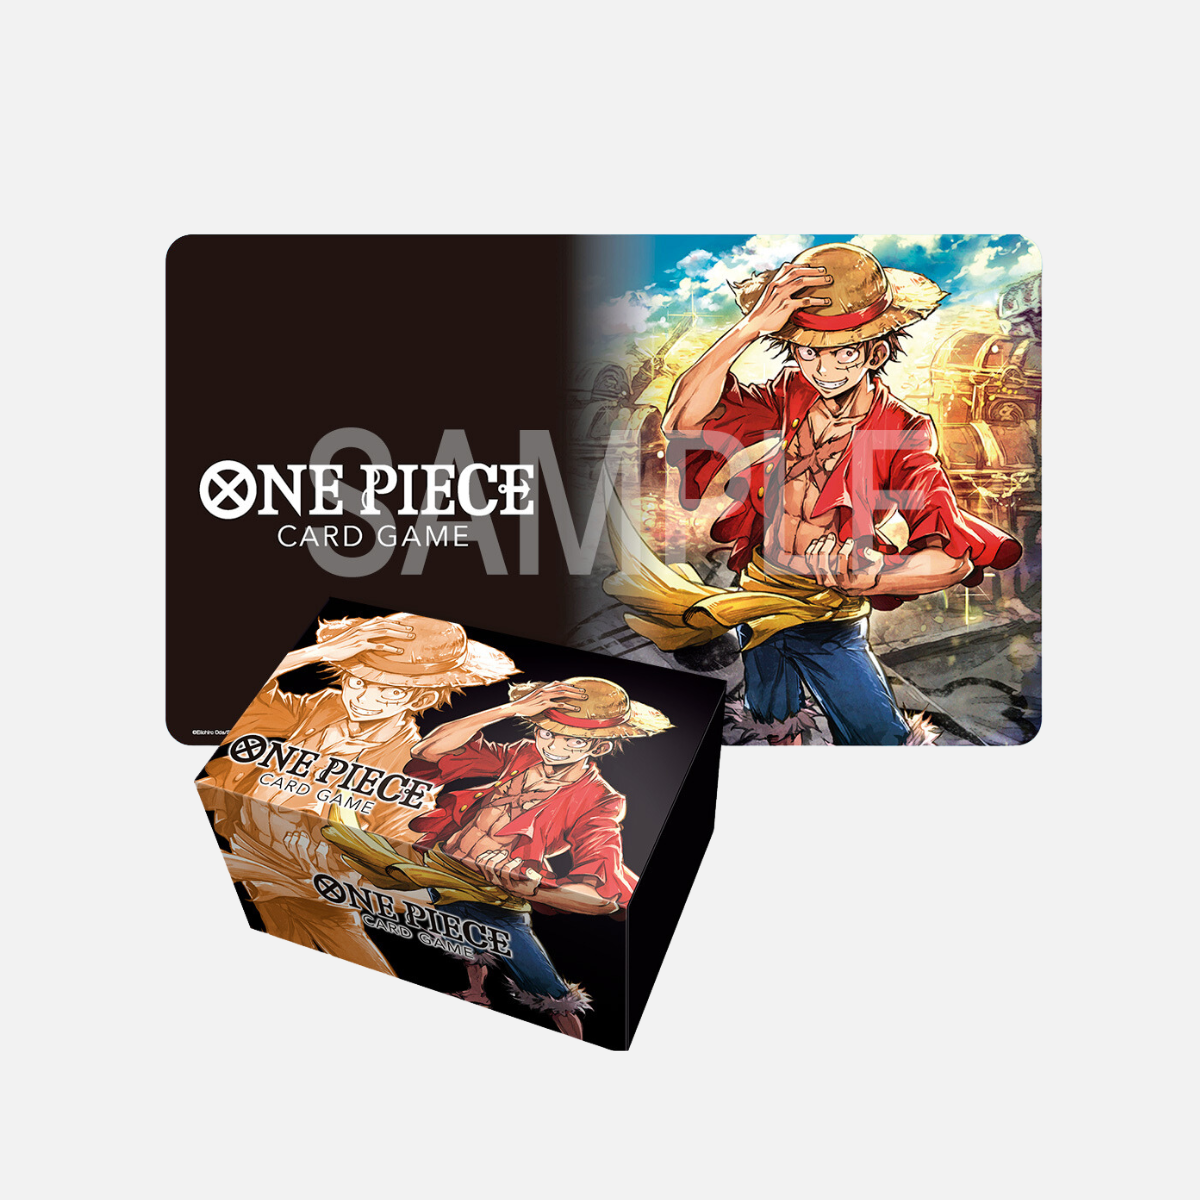 One Piece card game Playmat and Storage Box Monkey D. Luffy